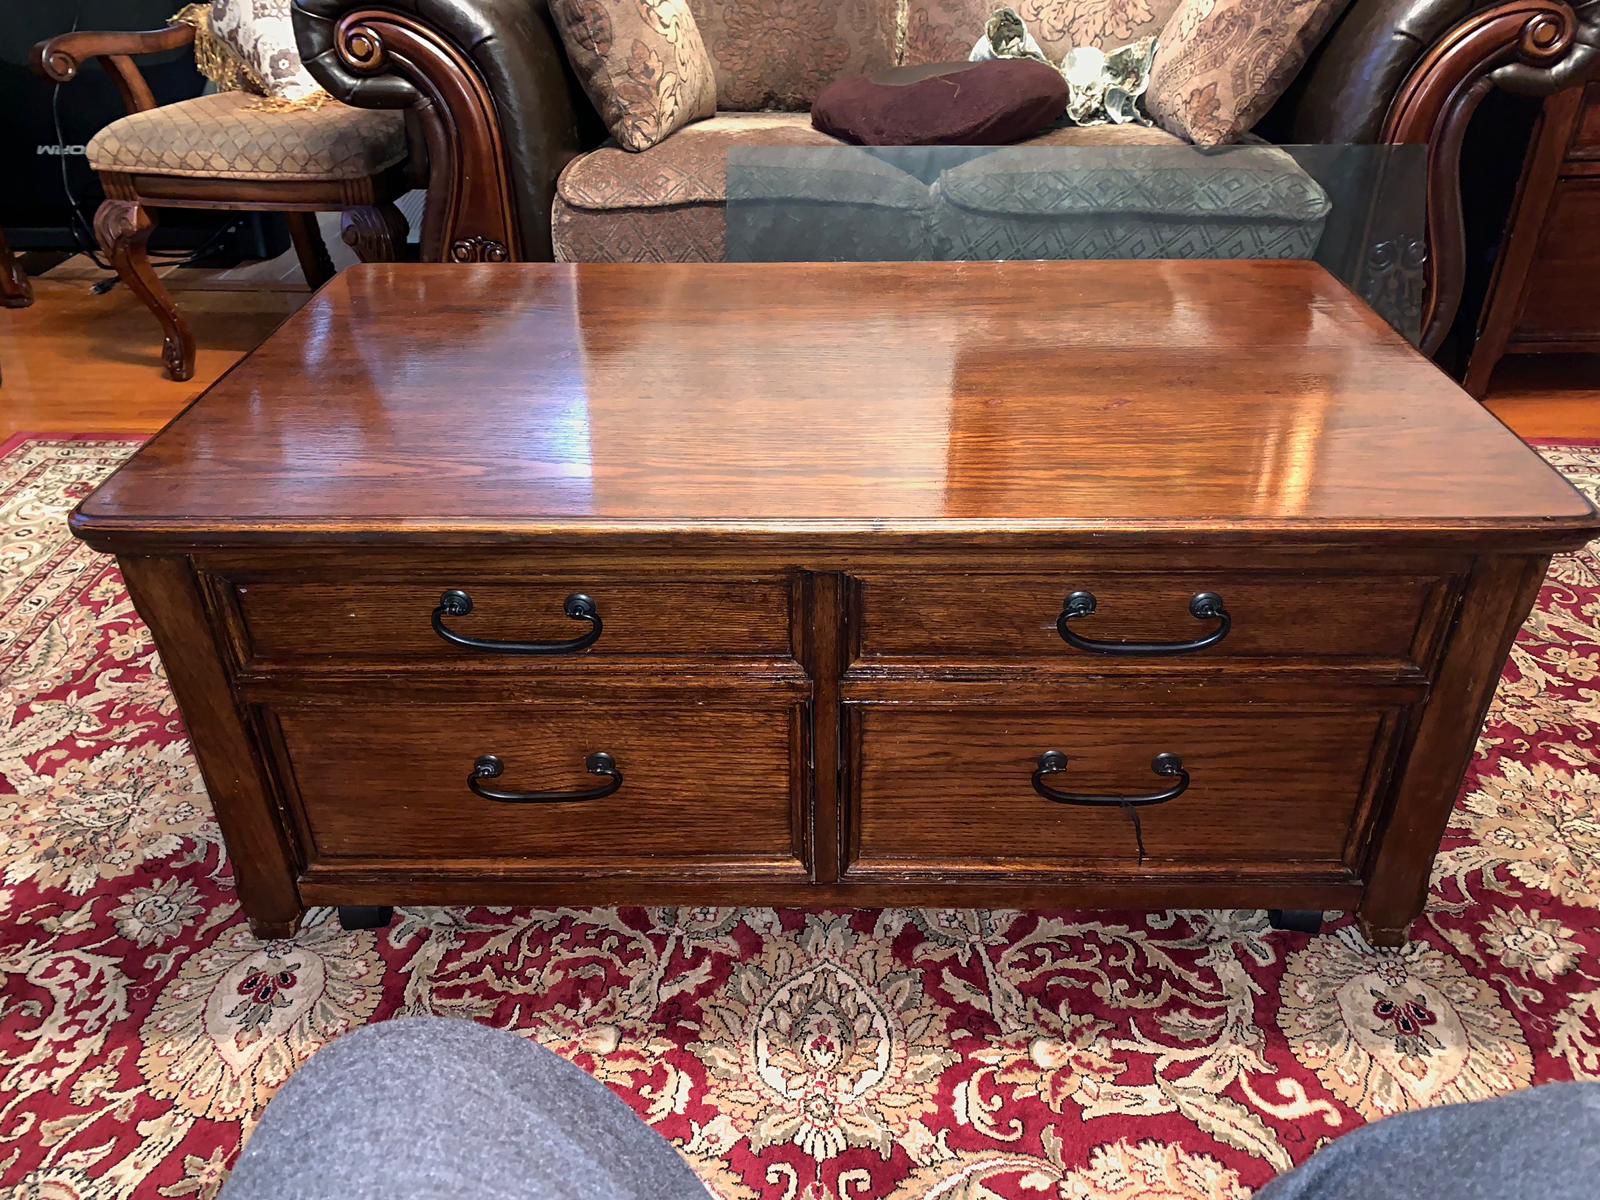 Beautiful coffee table with two end tables